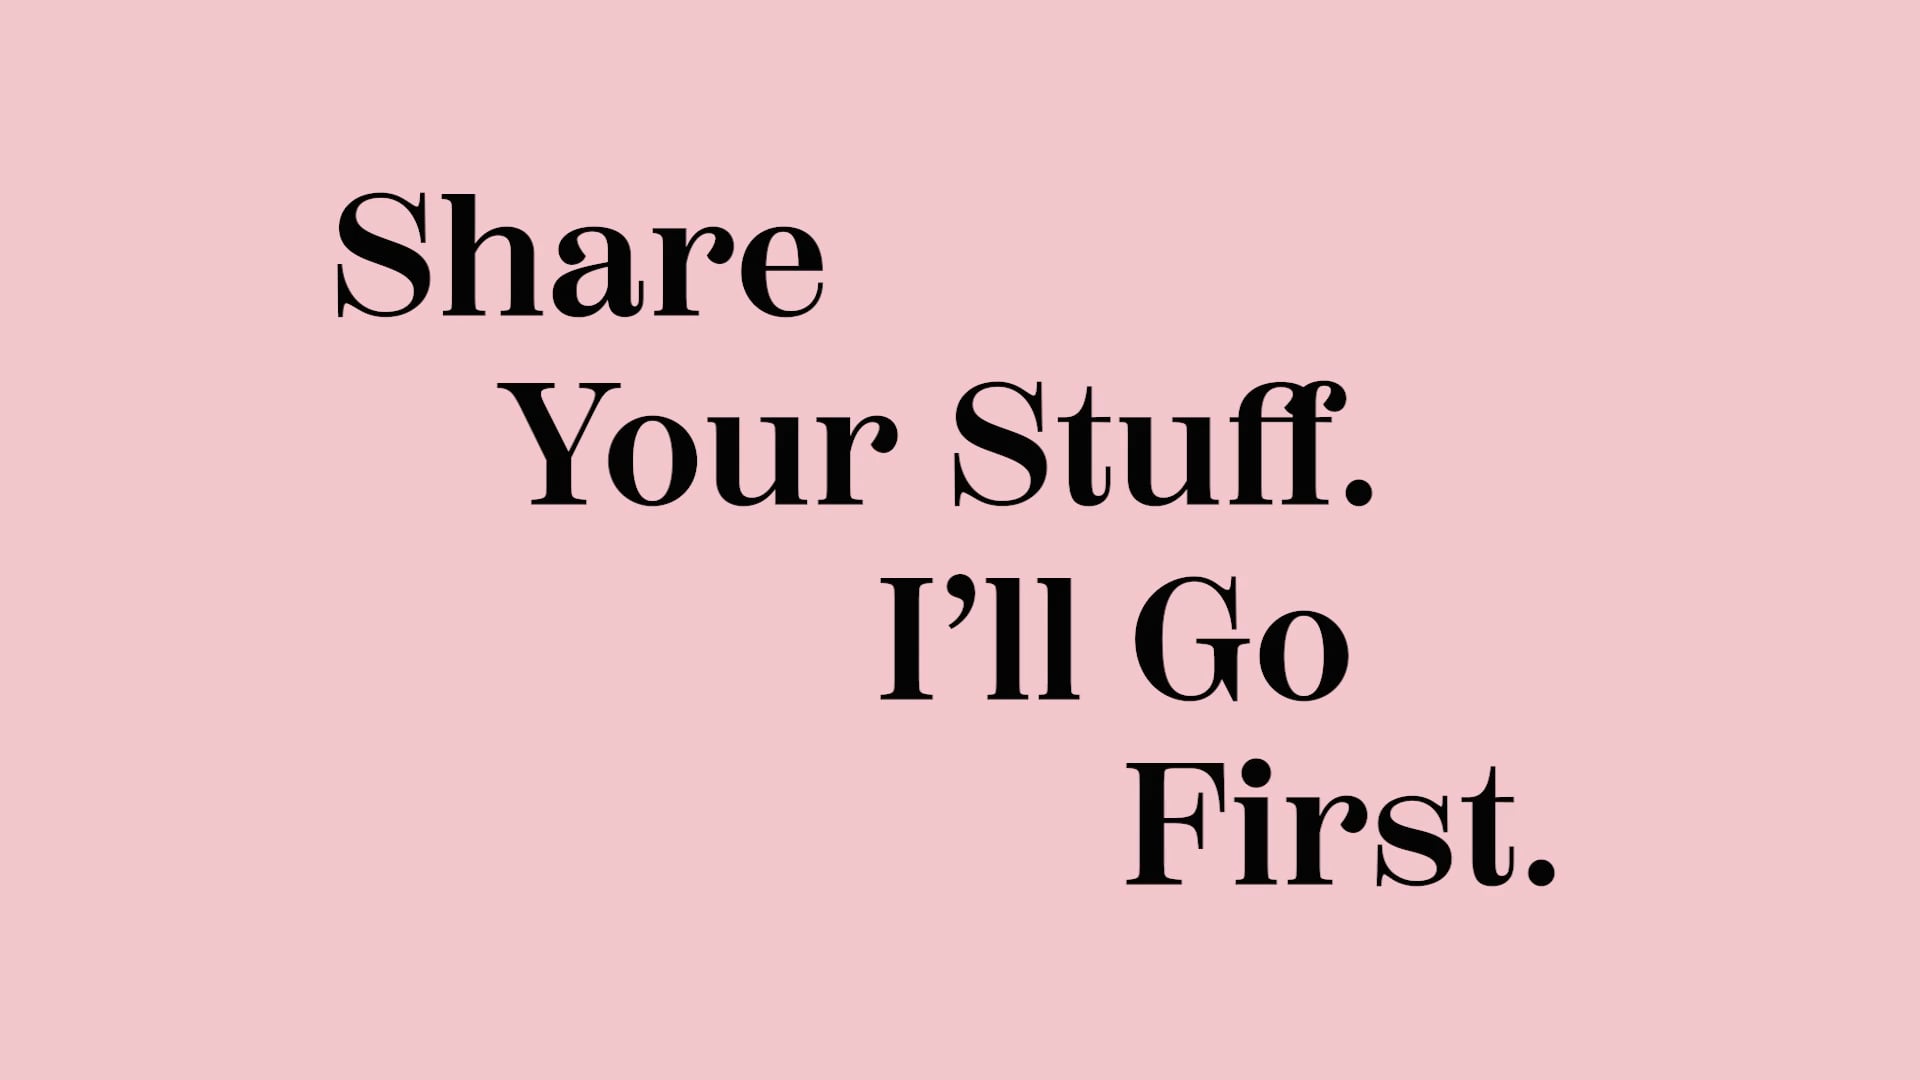 SHARE YOUR STUFF. I'LL GO FIRST.